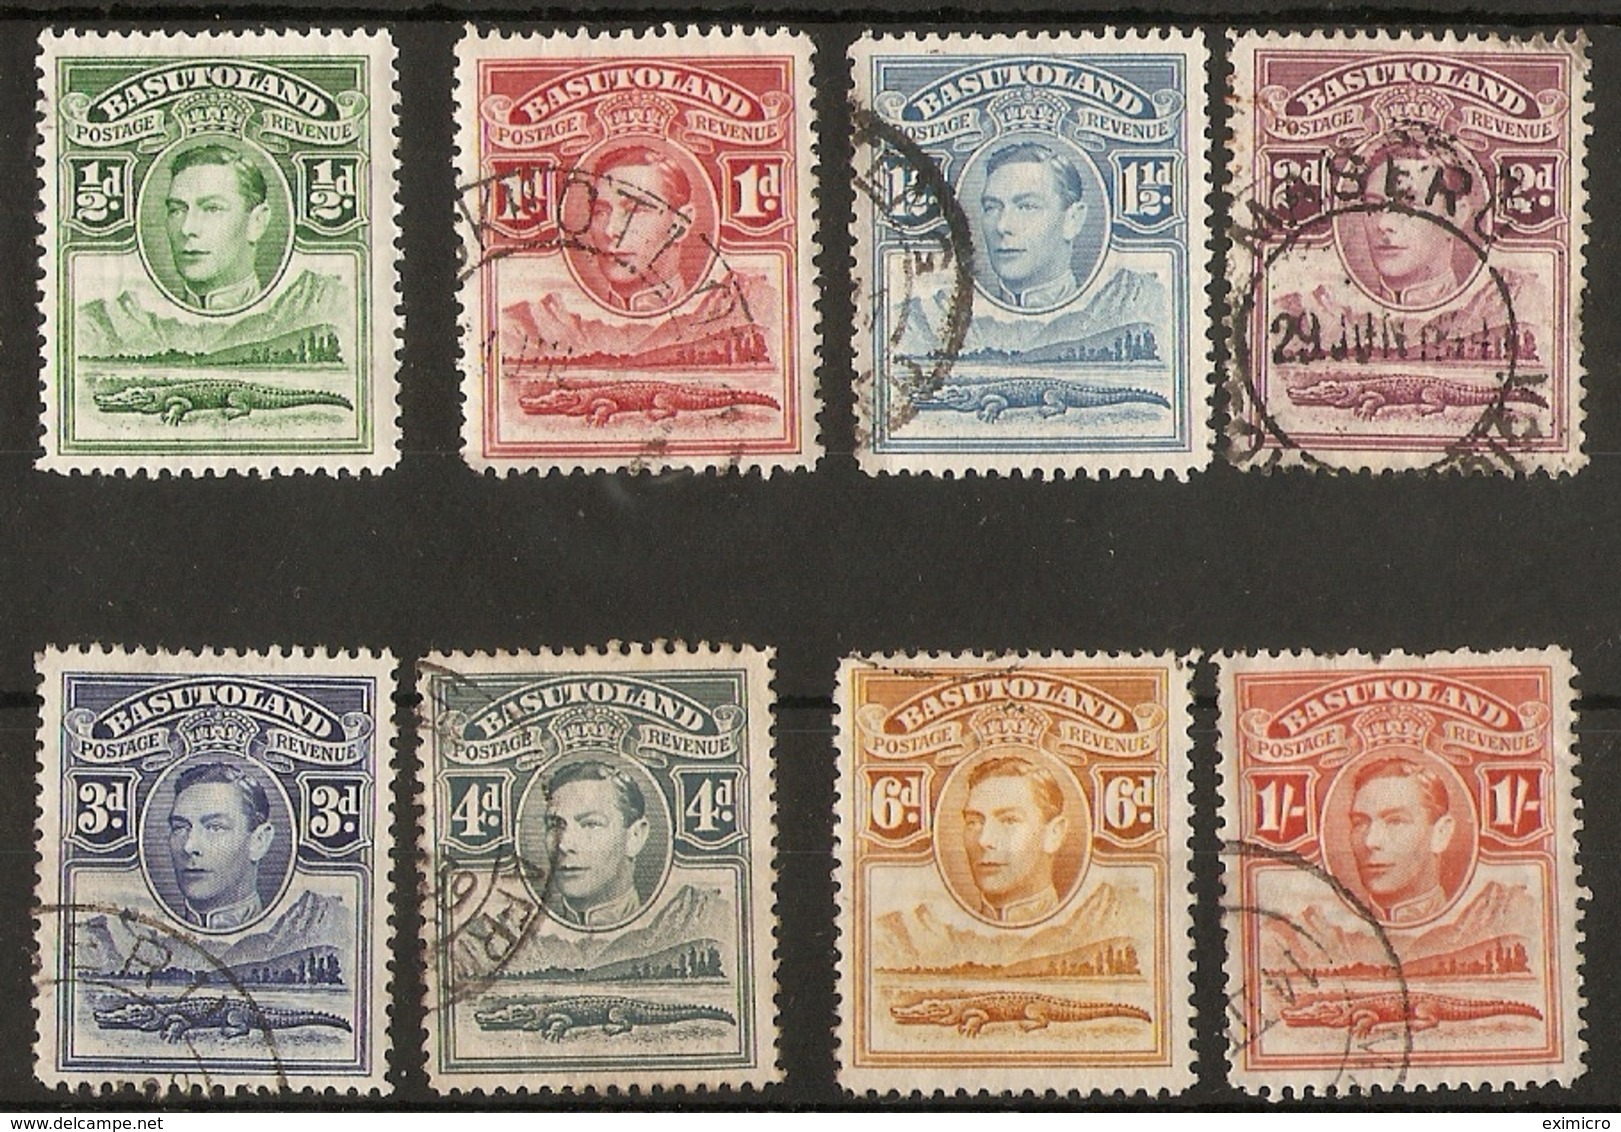 BASUTOLAND 1938 SET TO 1s SG 18/25 FINE USED Cat £10.55 - 1933-1964 Crown Colony